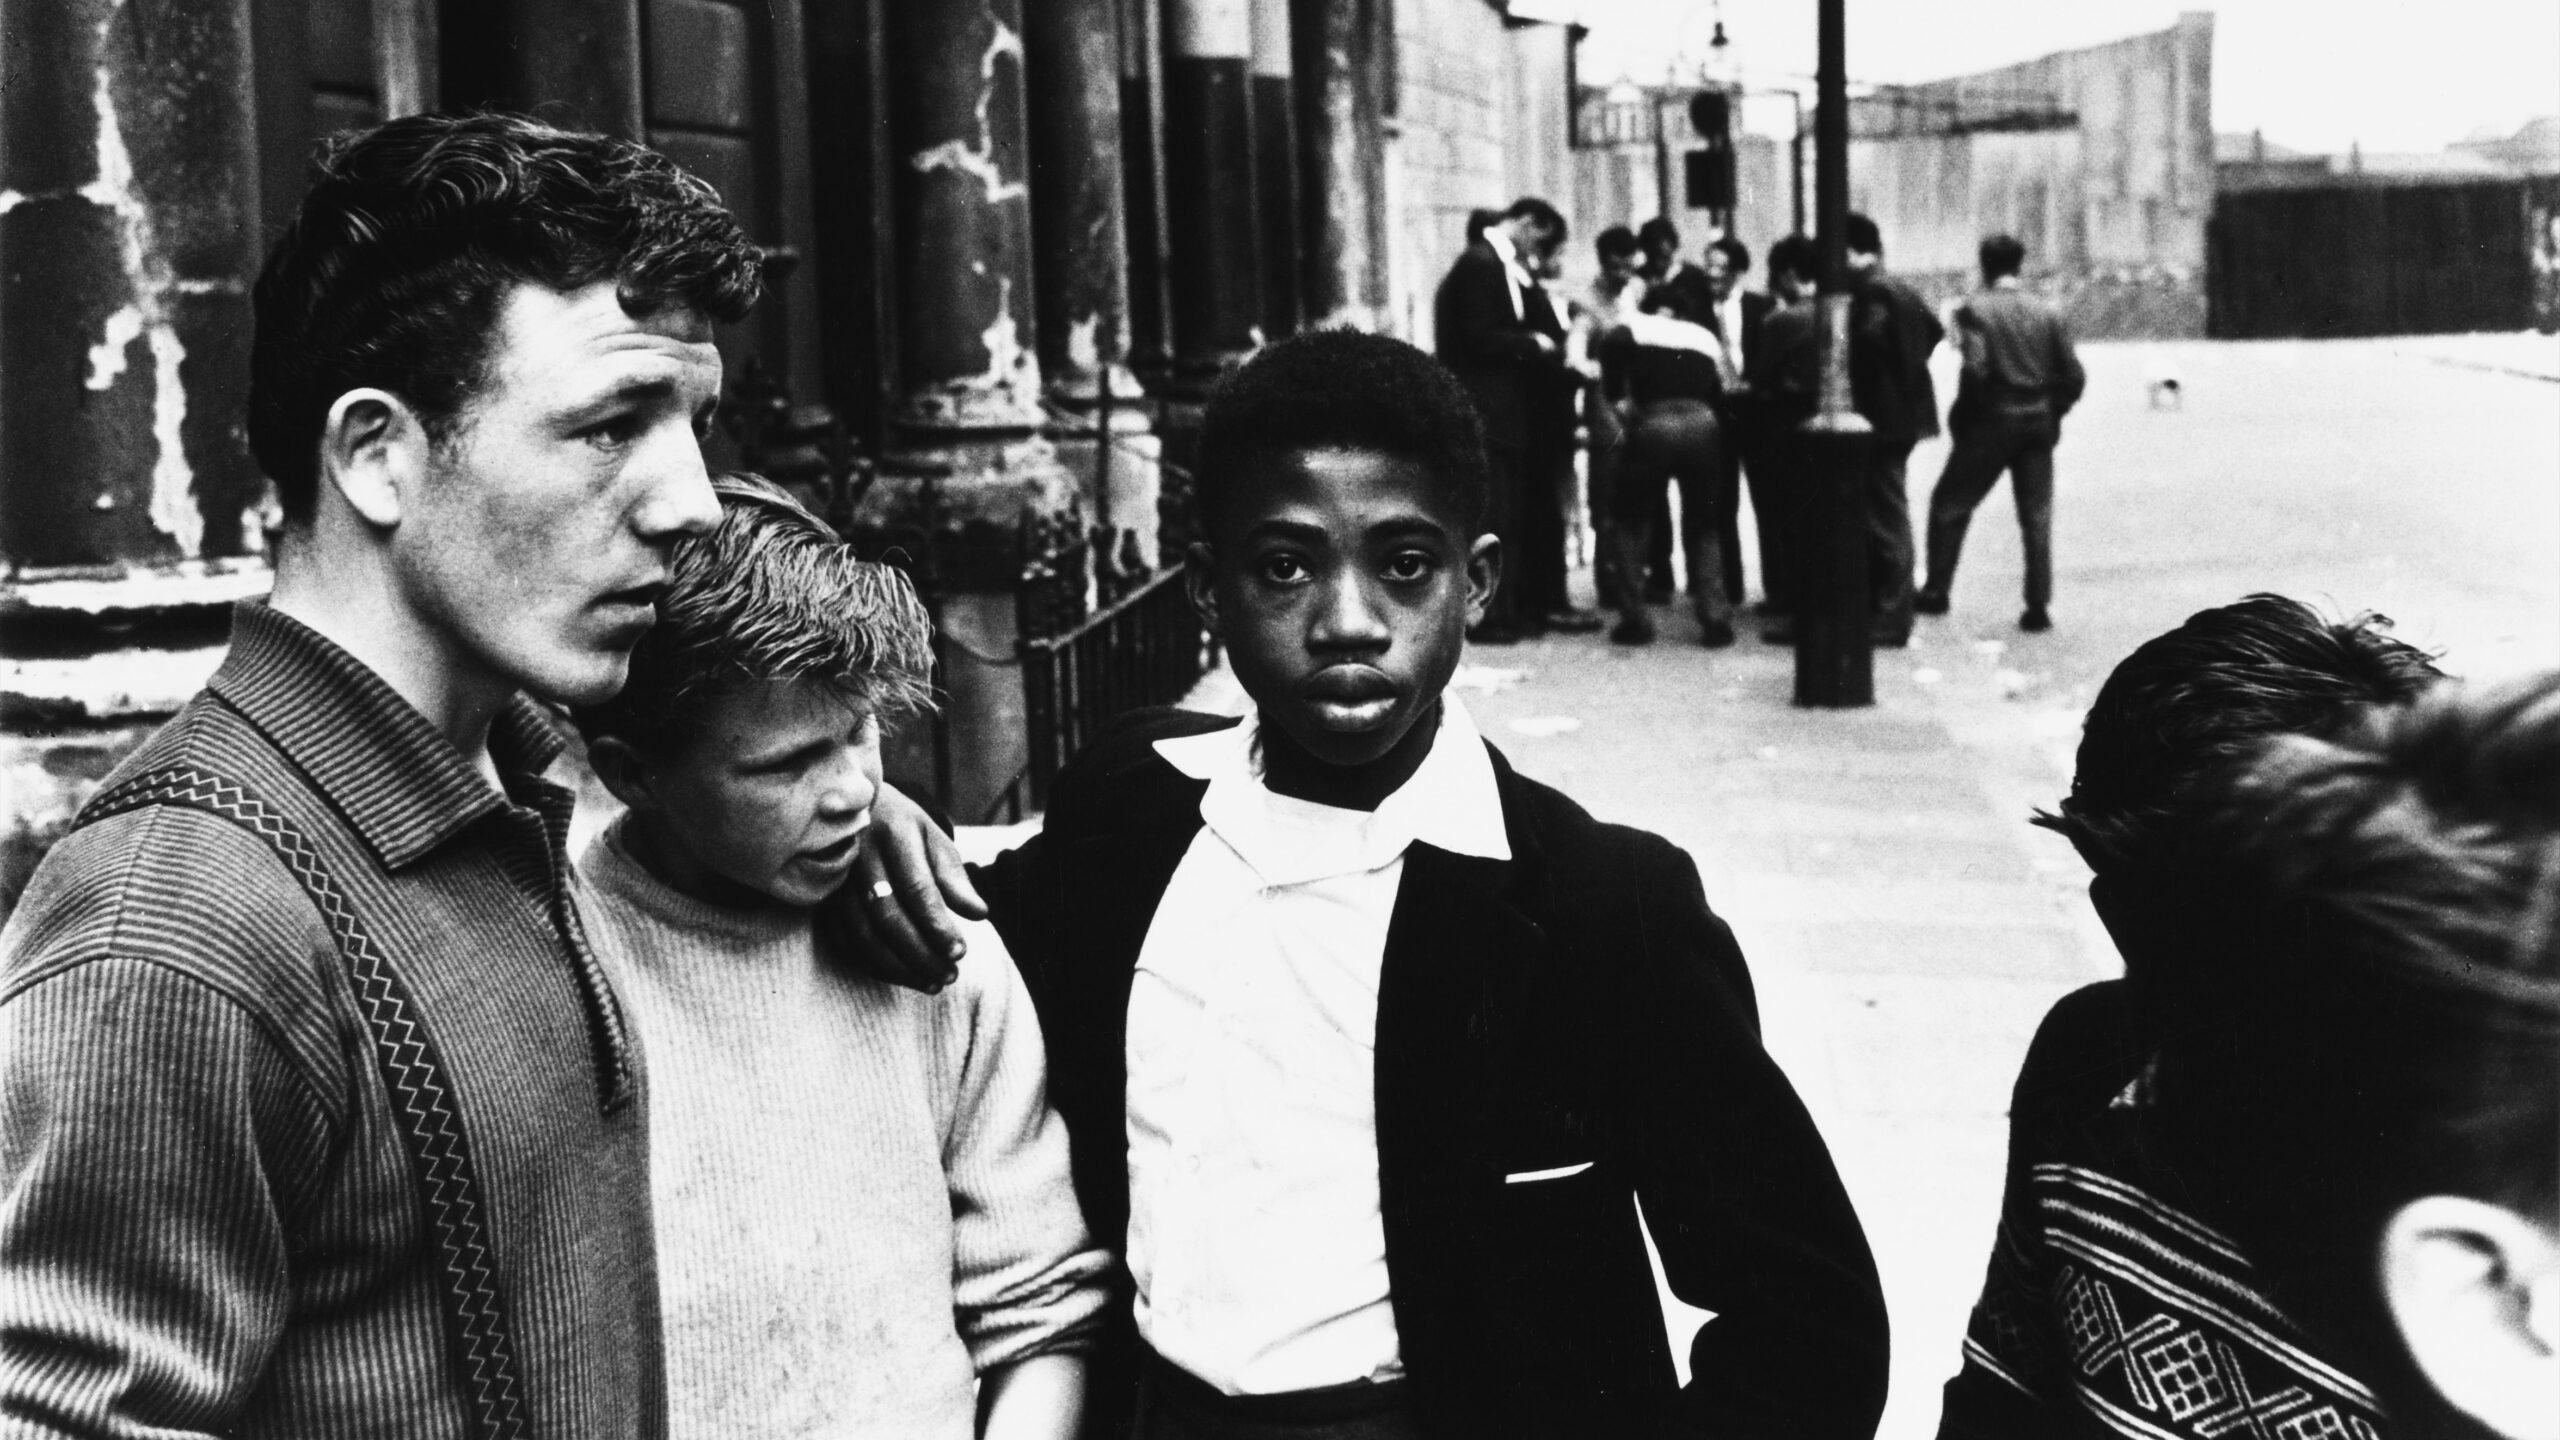 A black and white photo by Roger Mayne of teenage boys in 1950s inner city London